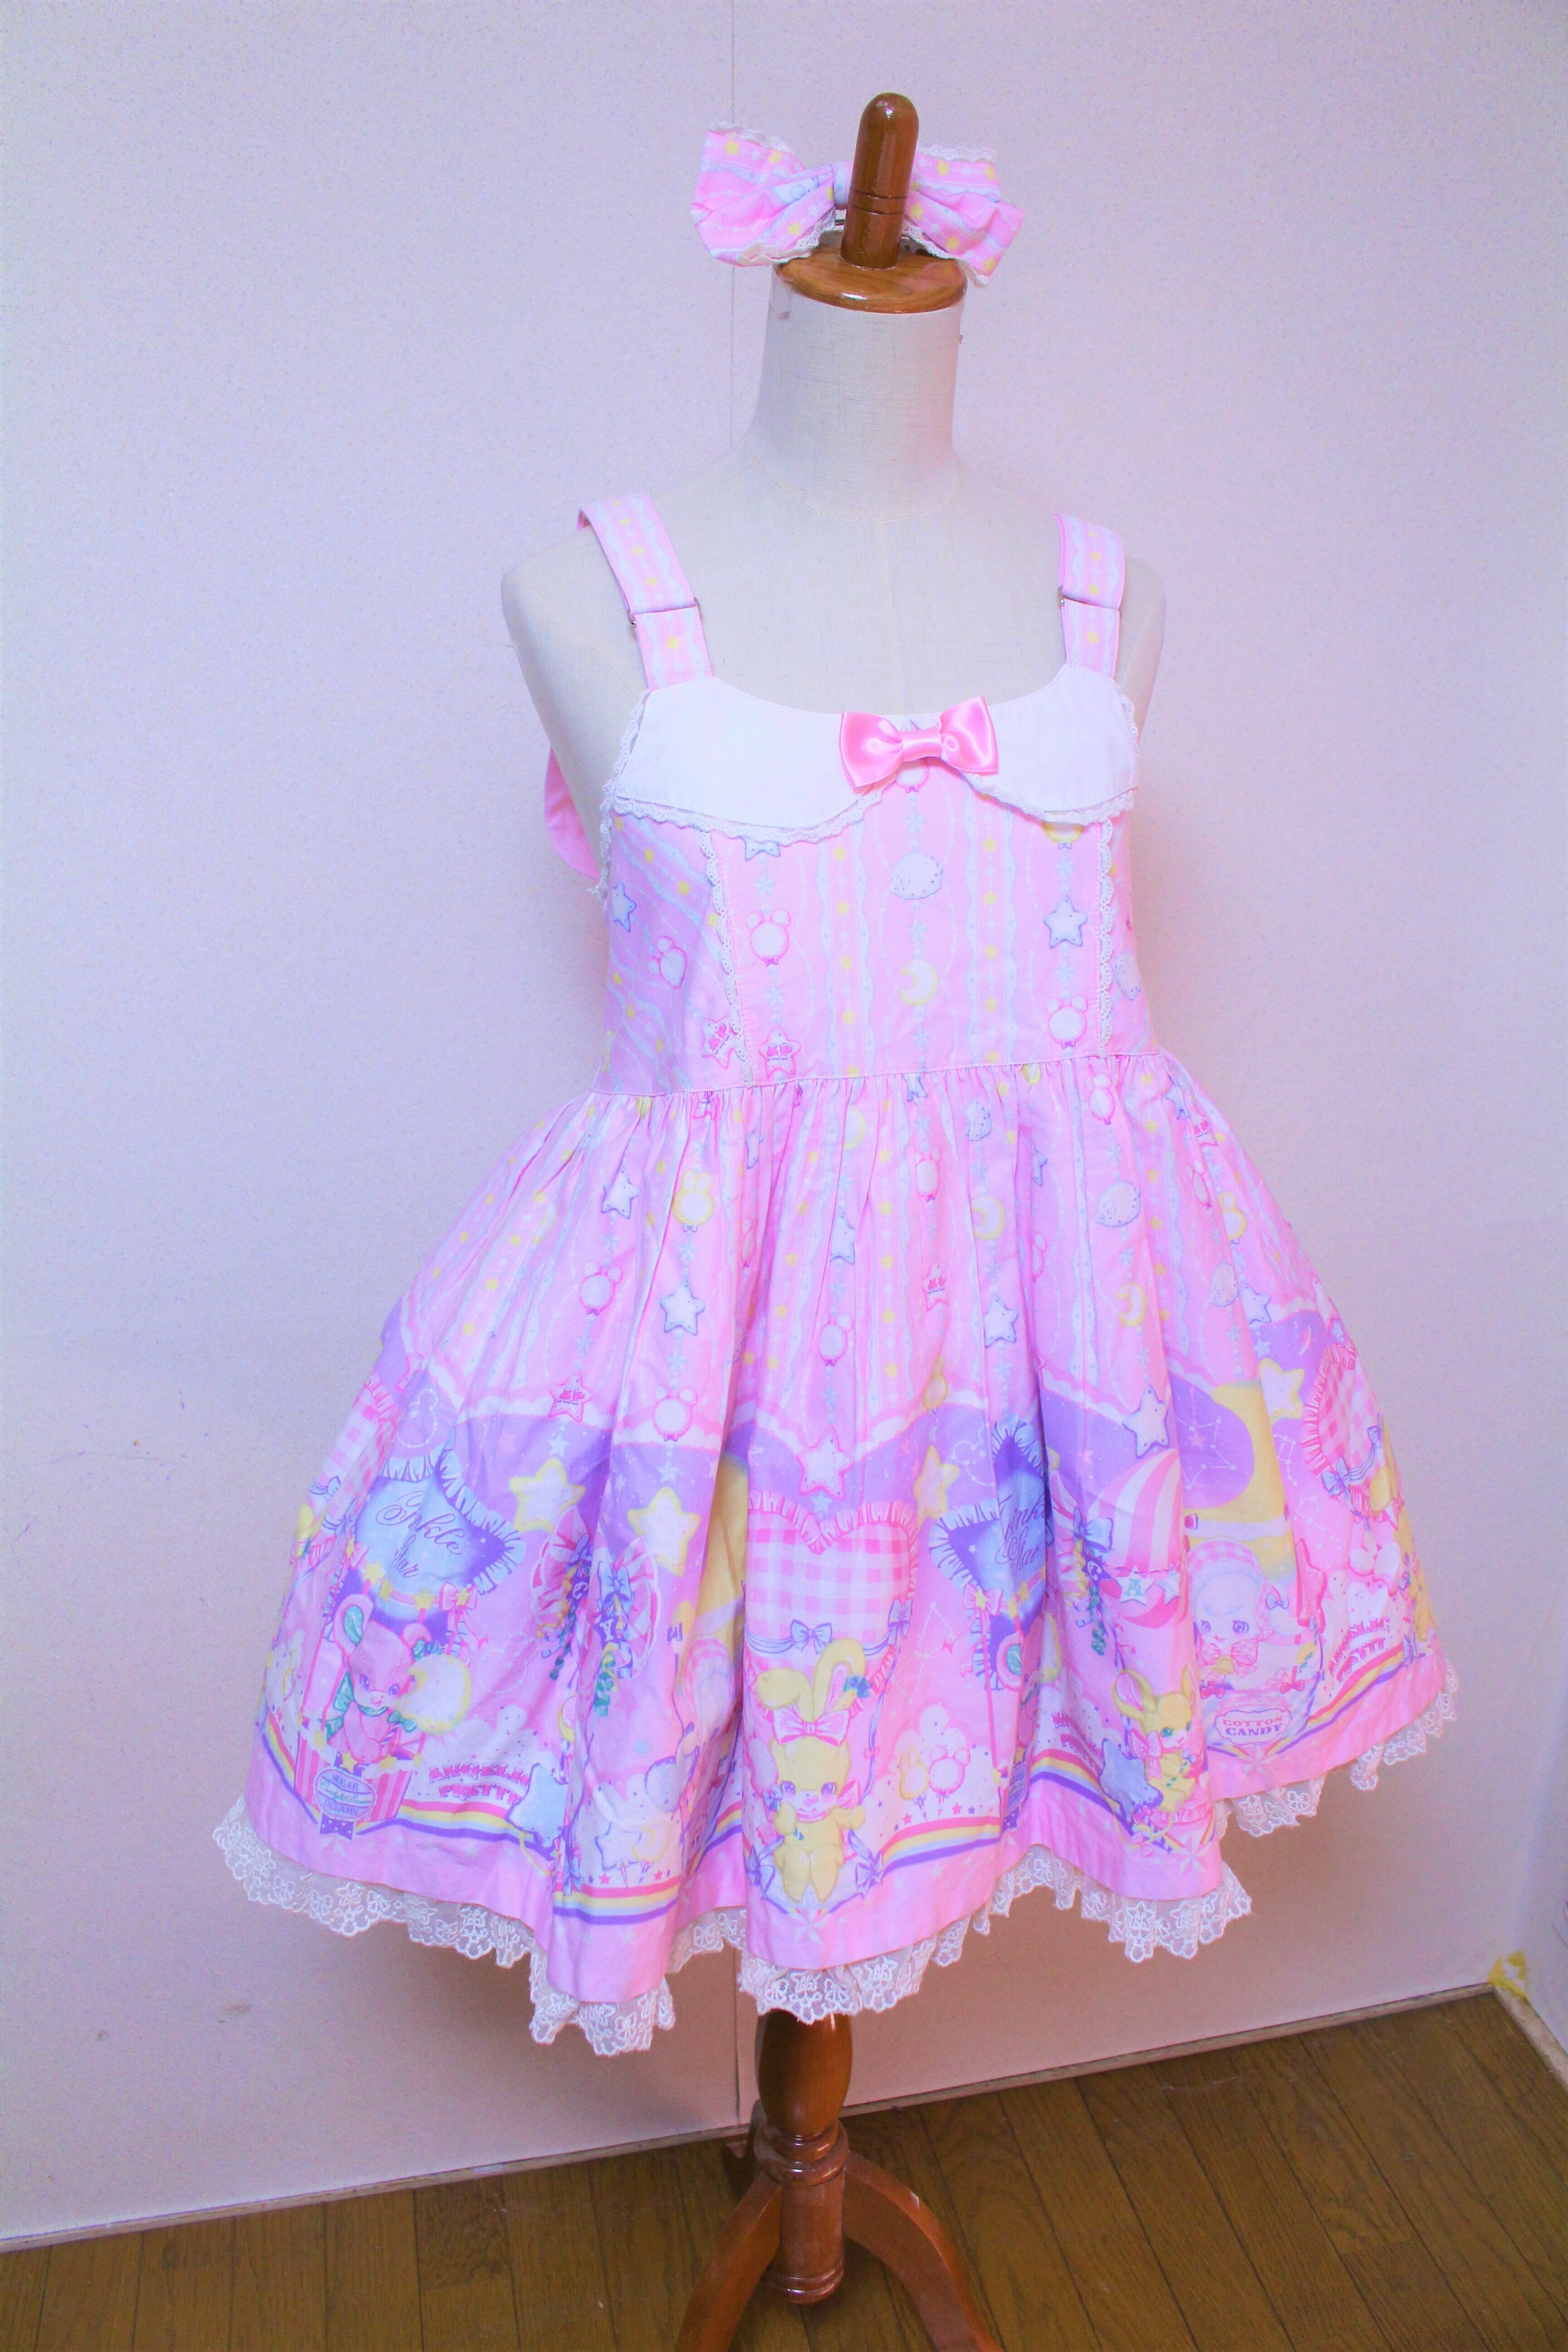 Angelic Pretty  Cotton Candy Shop サロペット